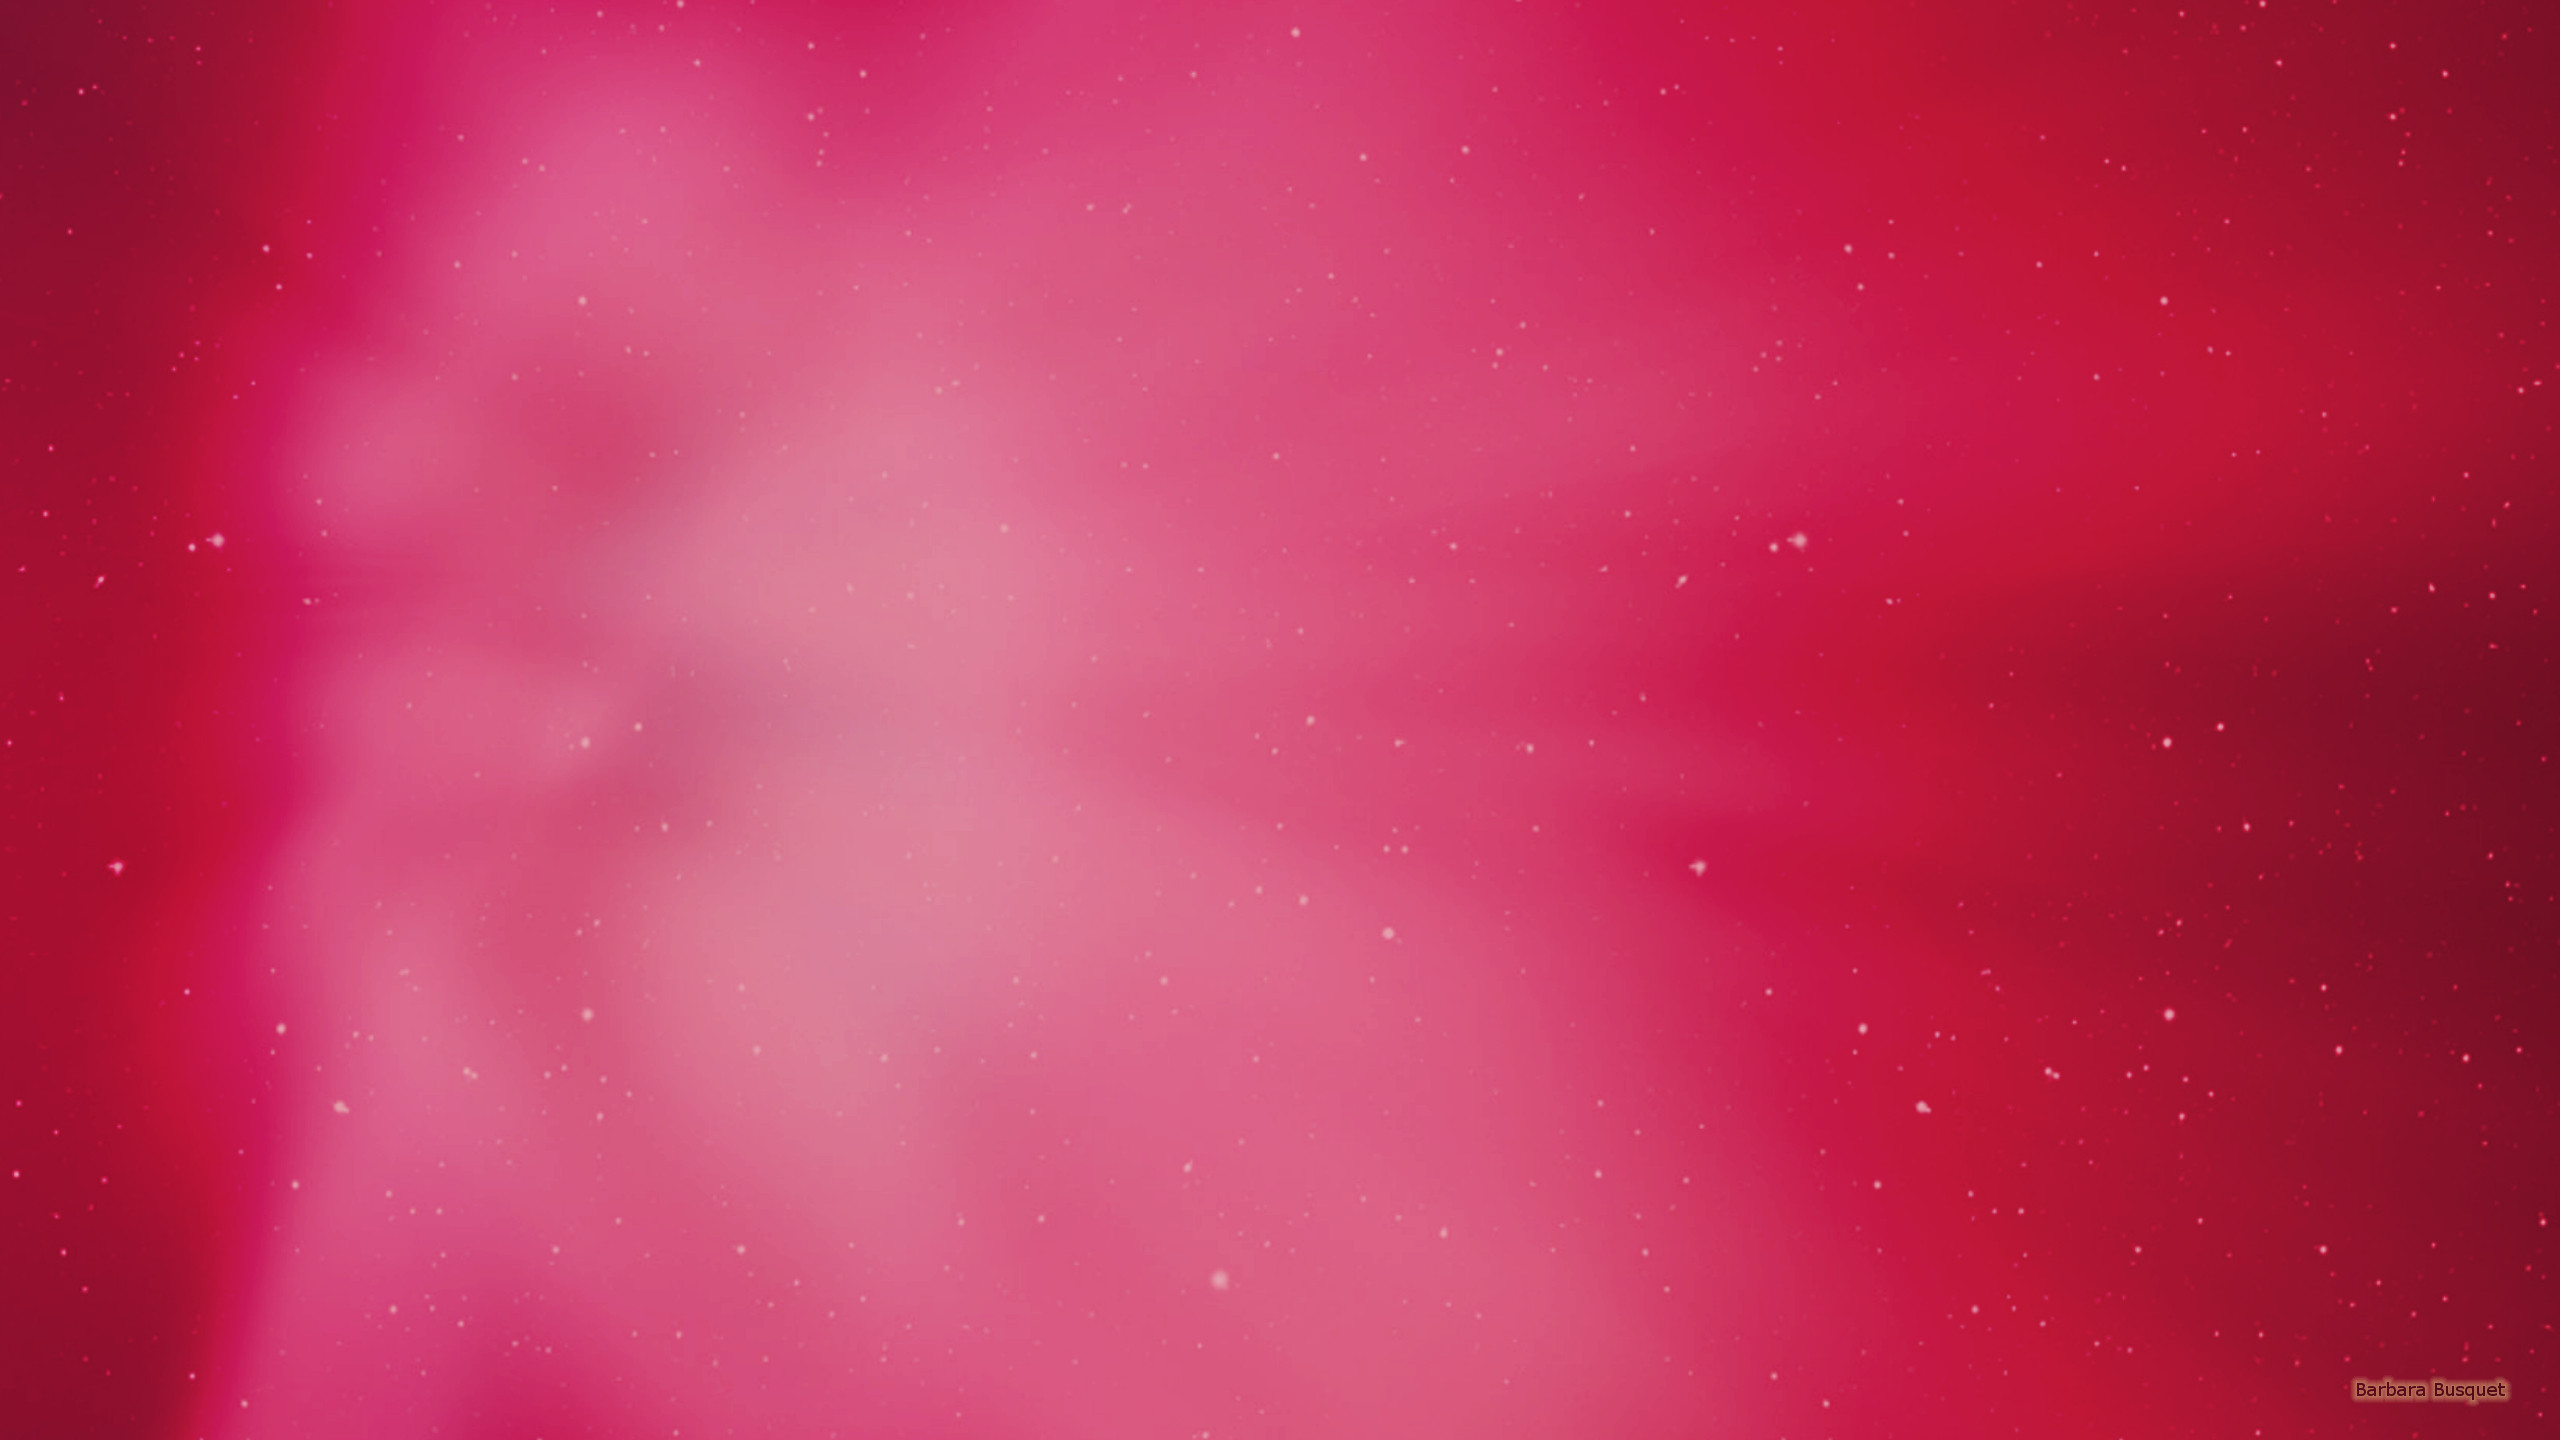 Red galaxy wallpaper with stars and gas clouds.